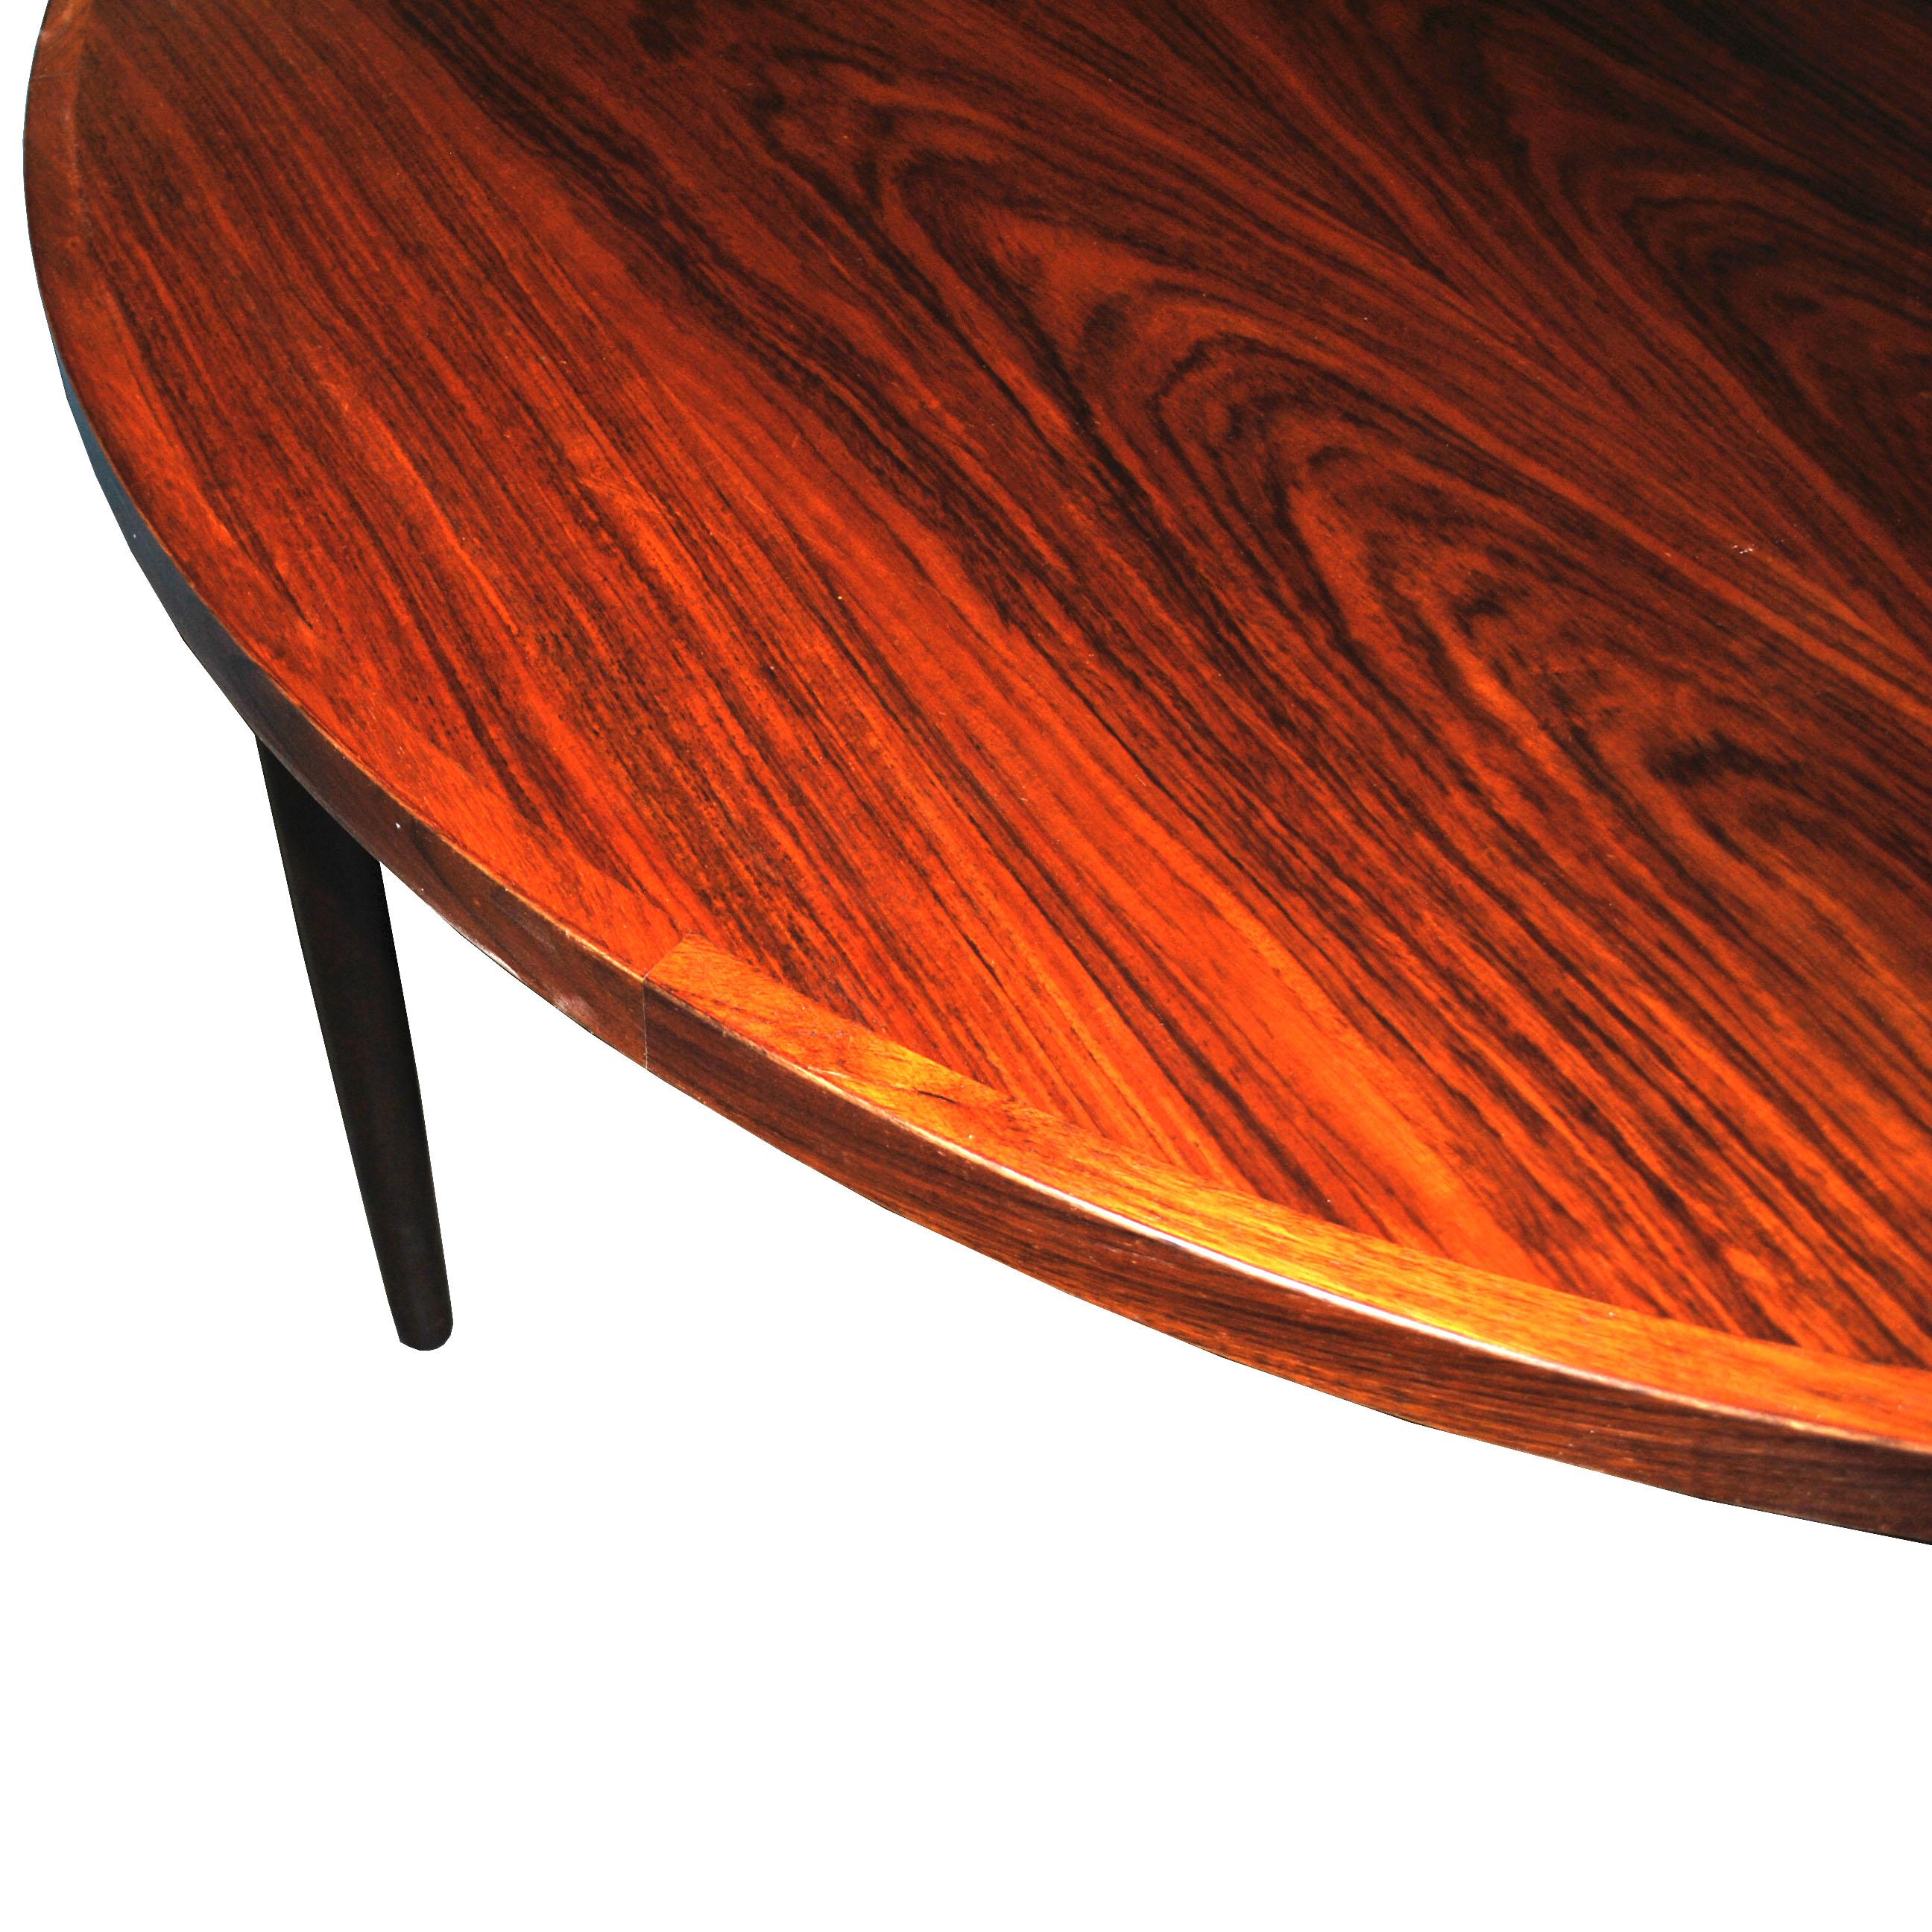 Mid-20th Century Danish Mid-Century Modern Rosewood Revolving Table For Sale